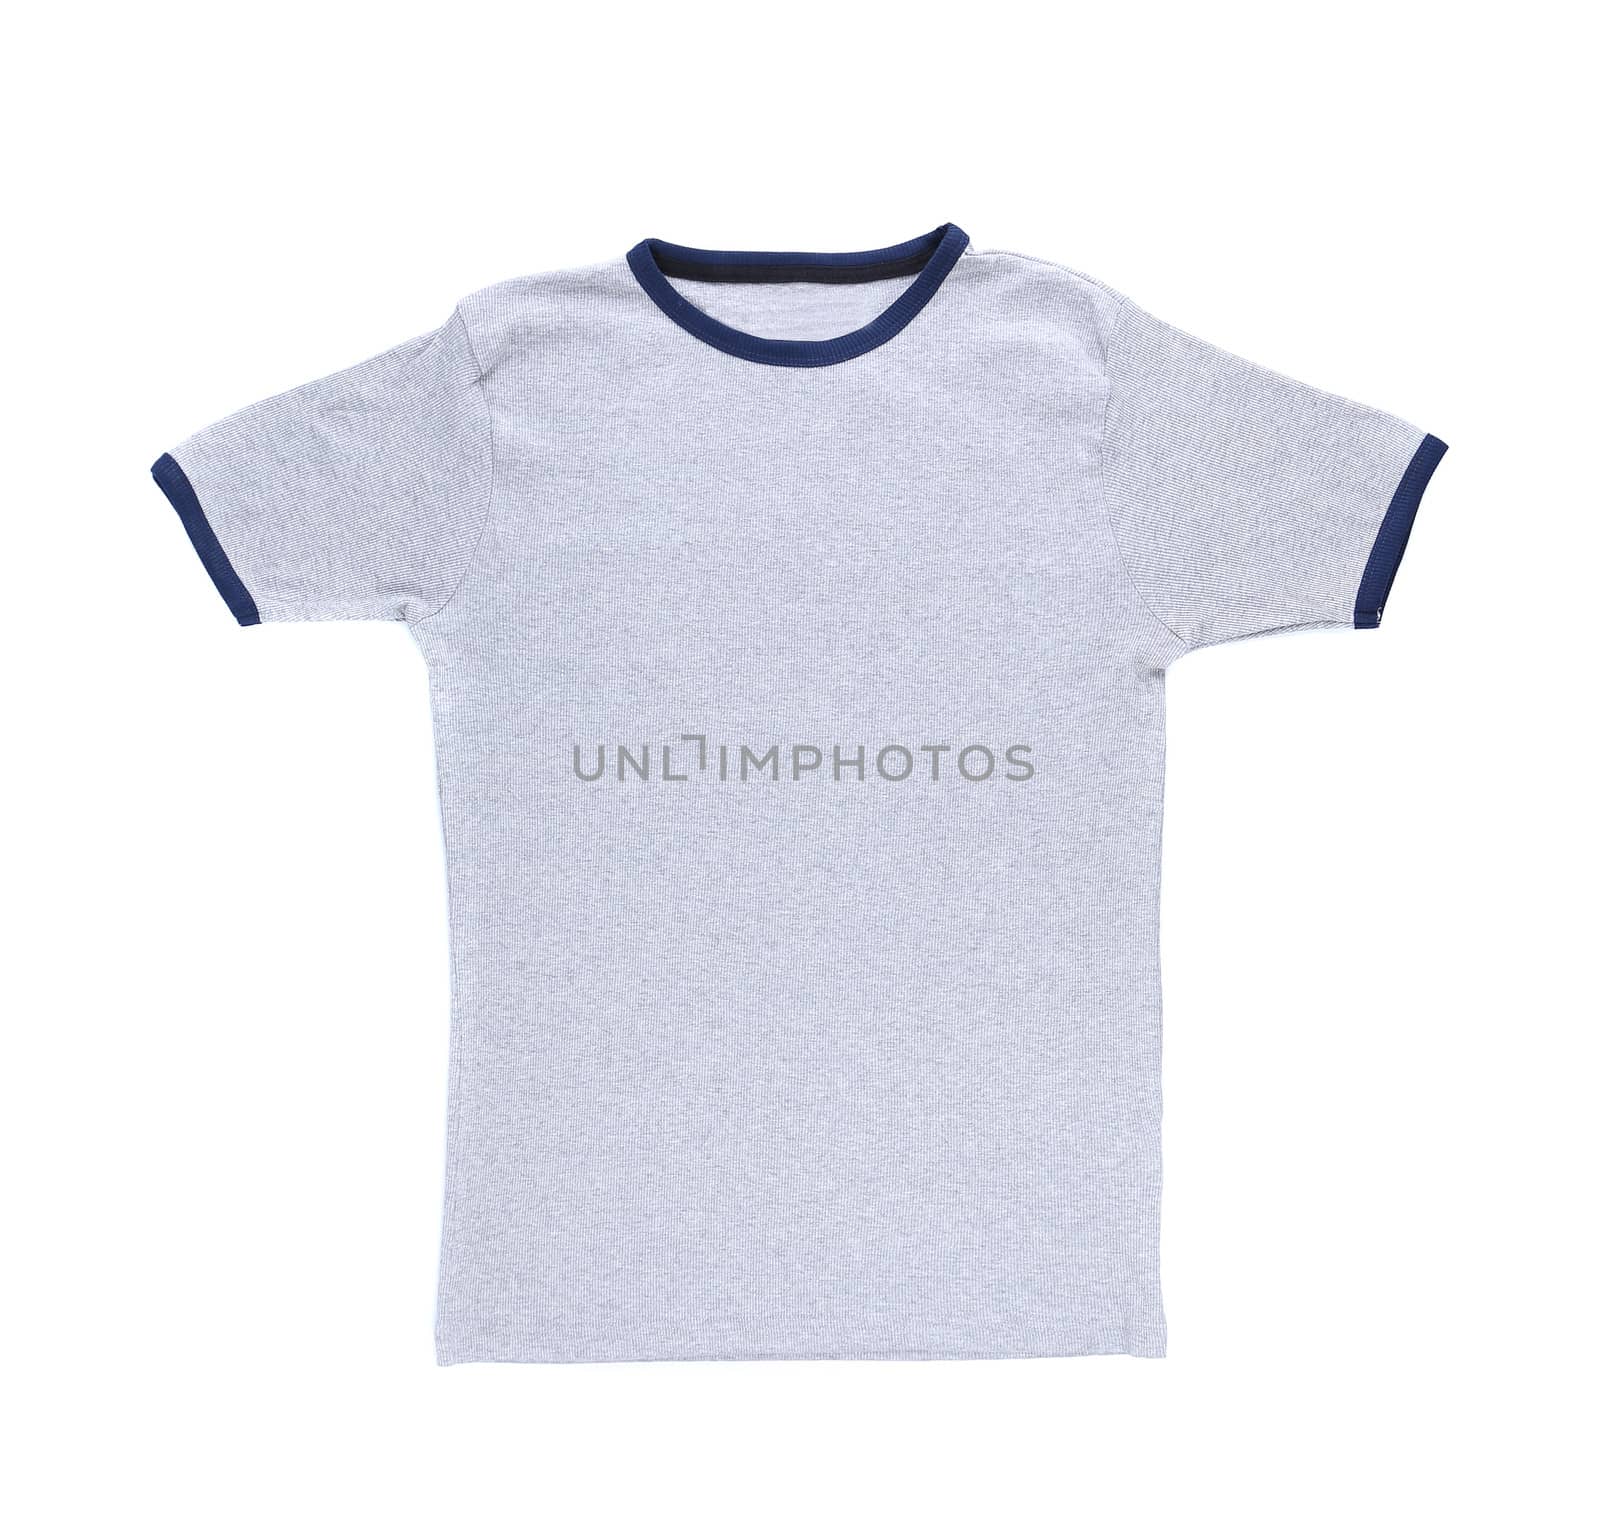 A white t-shirt isolated on a white background